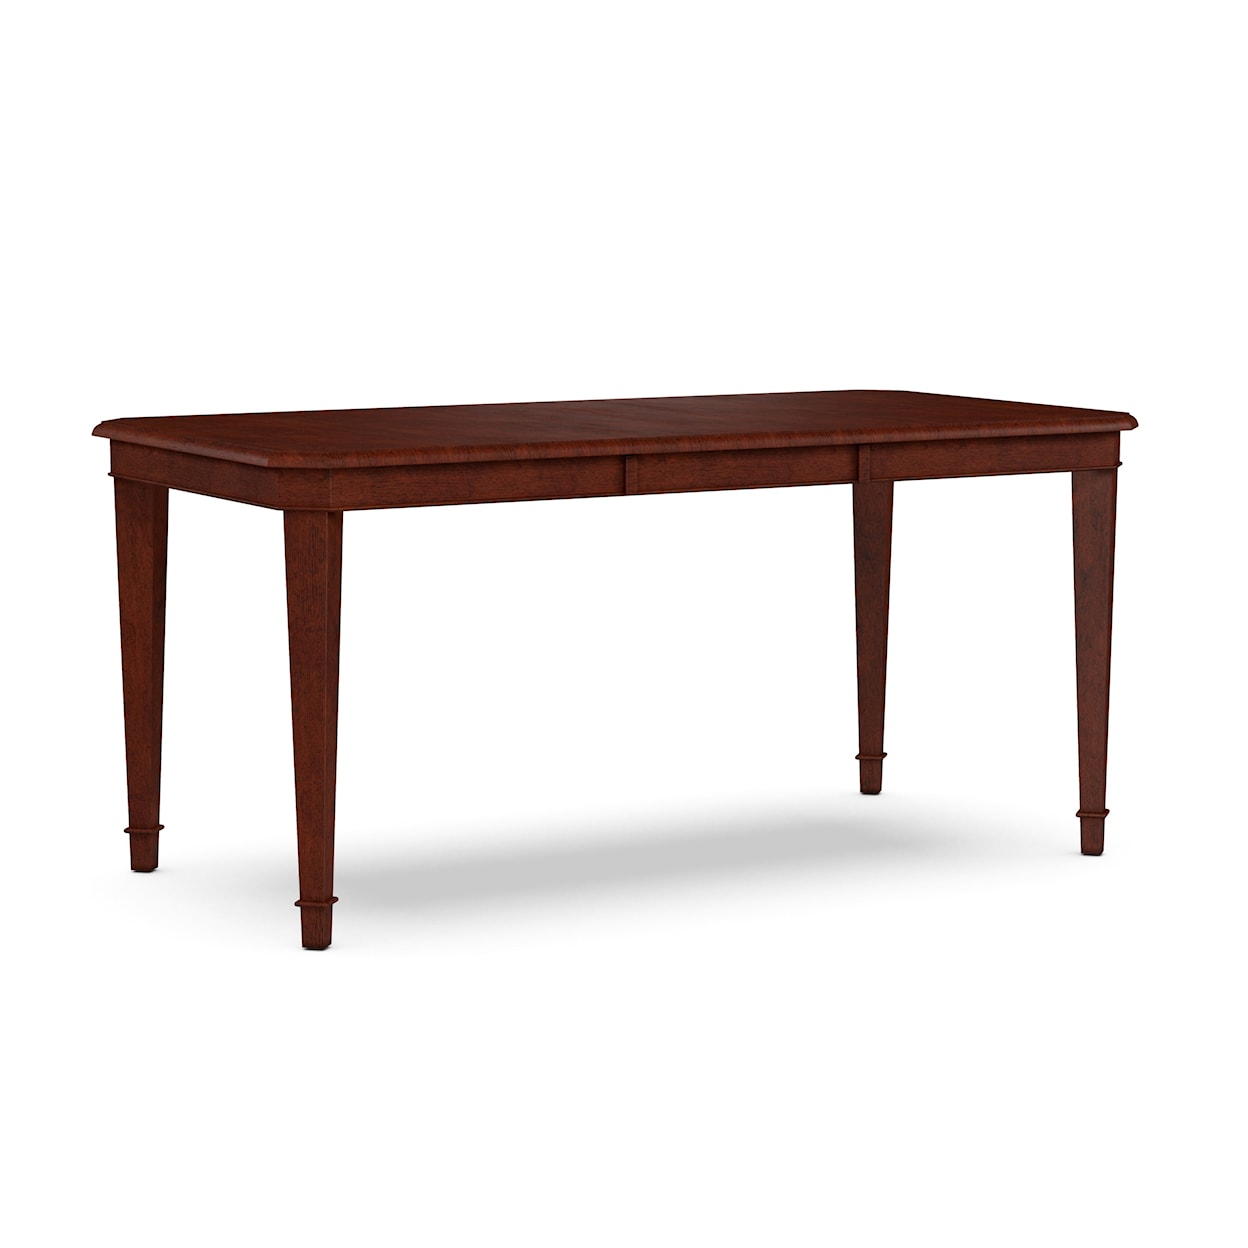 John Thomas SELECT Dining Room Counter Height Dining Table